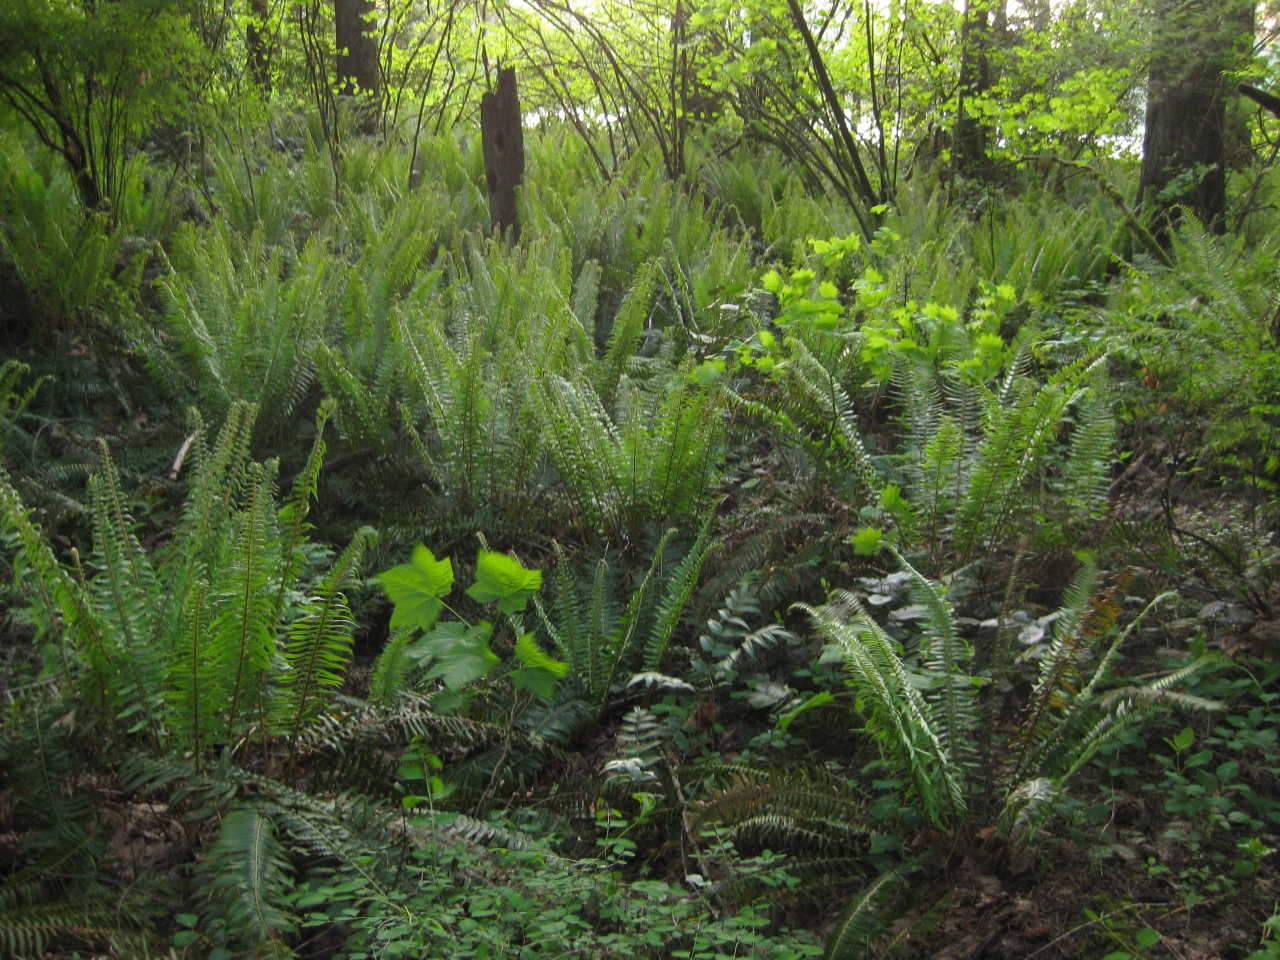 Ferns grow through out the woods